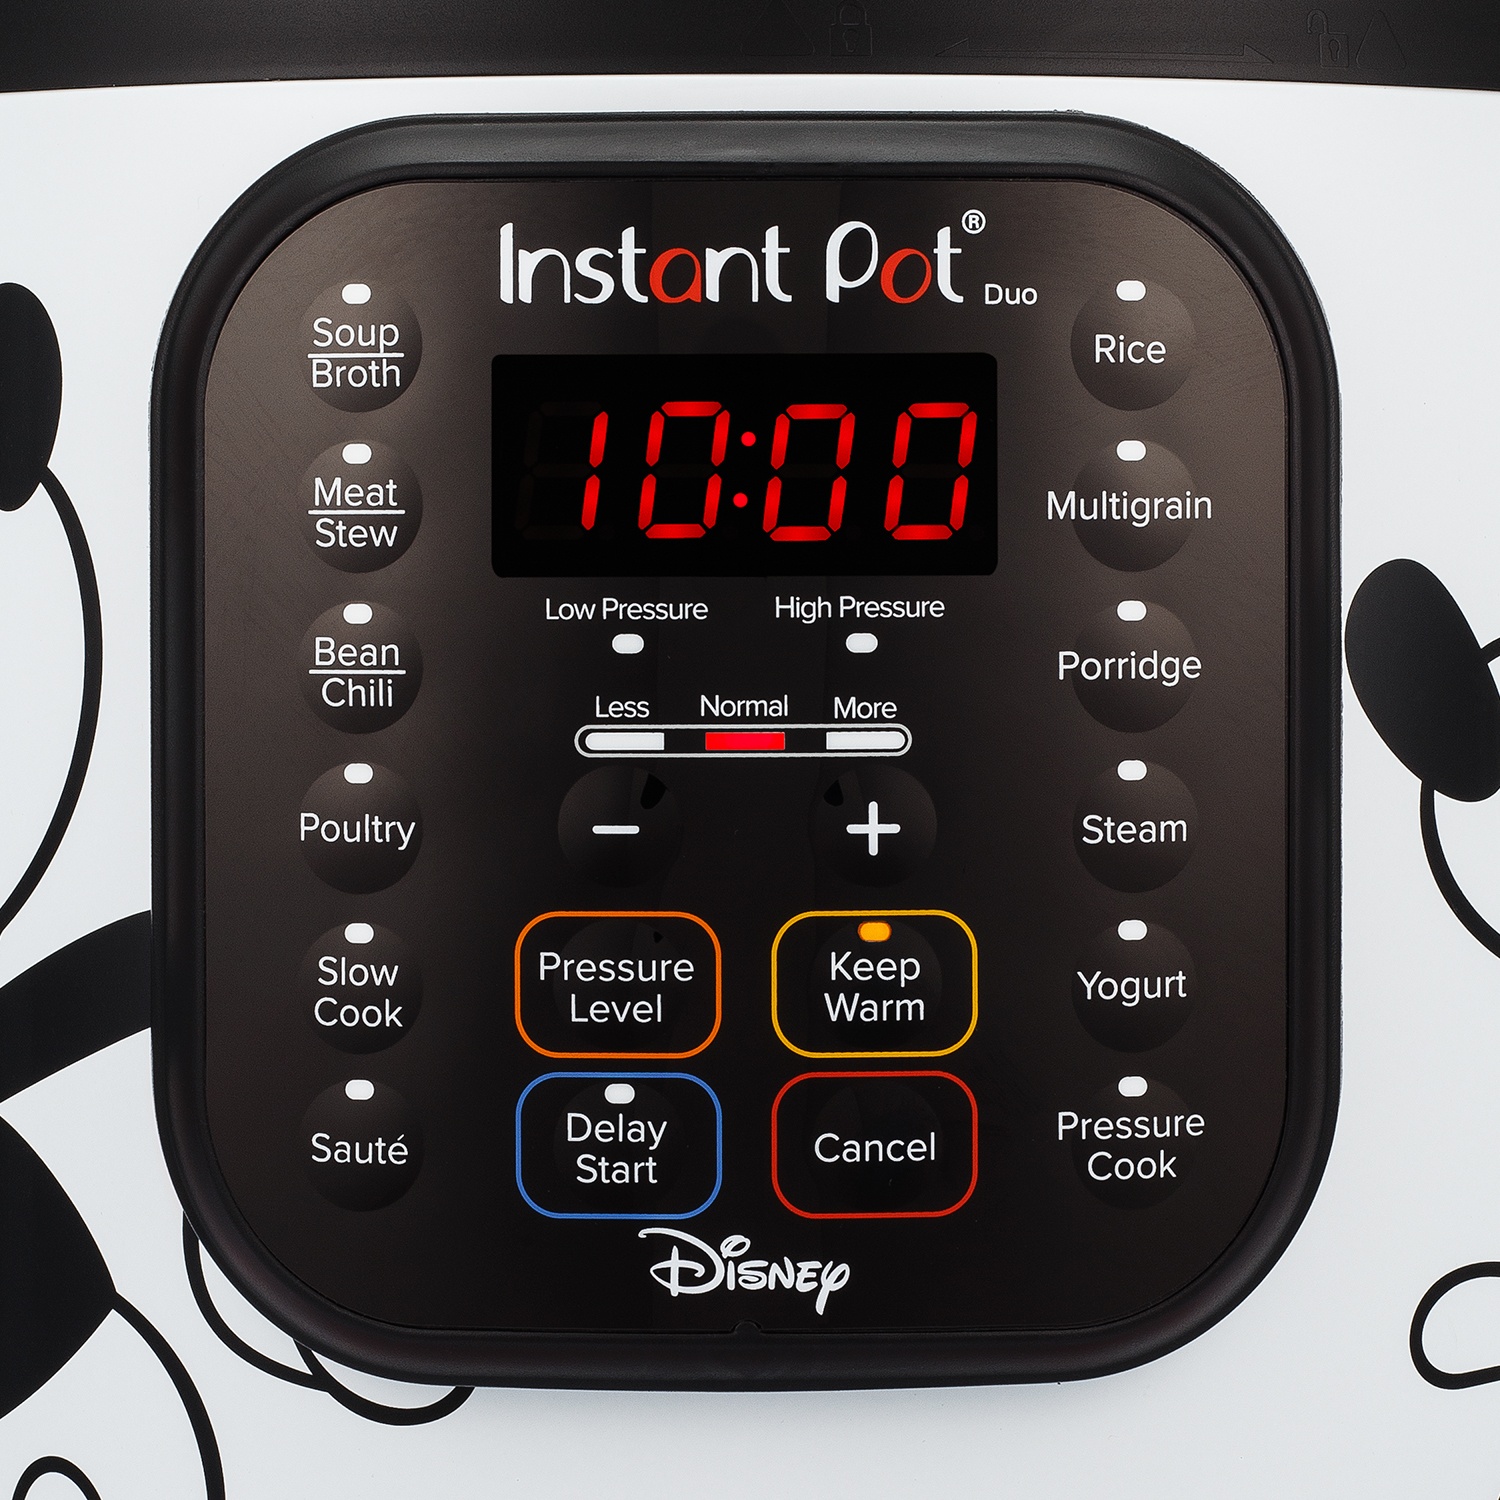 Instant Pot 6-Quart Duo Electric Pressure Cooker, 7-in-1 Yogurt Maker, Food Steamer, Slow Cooker, Rice Cooker & More, Disney Mickey Mouse, White - image 3 of 4